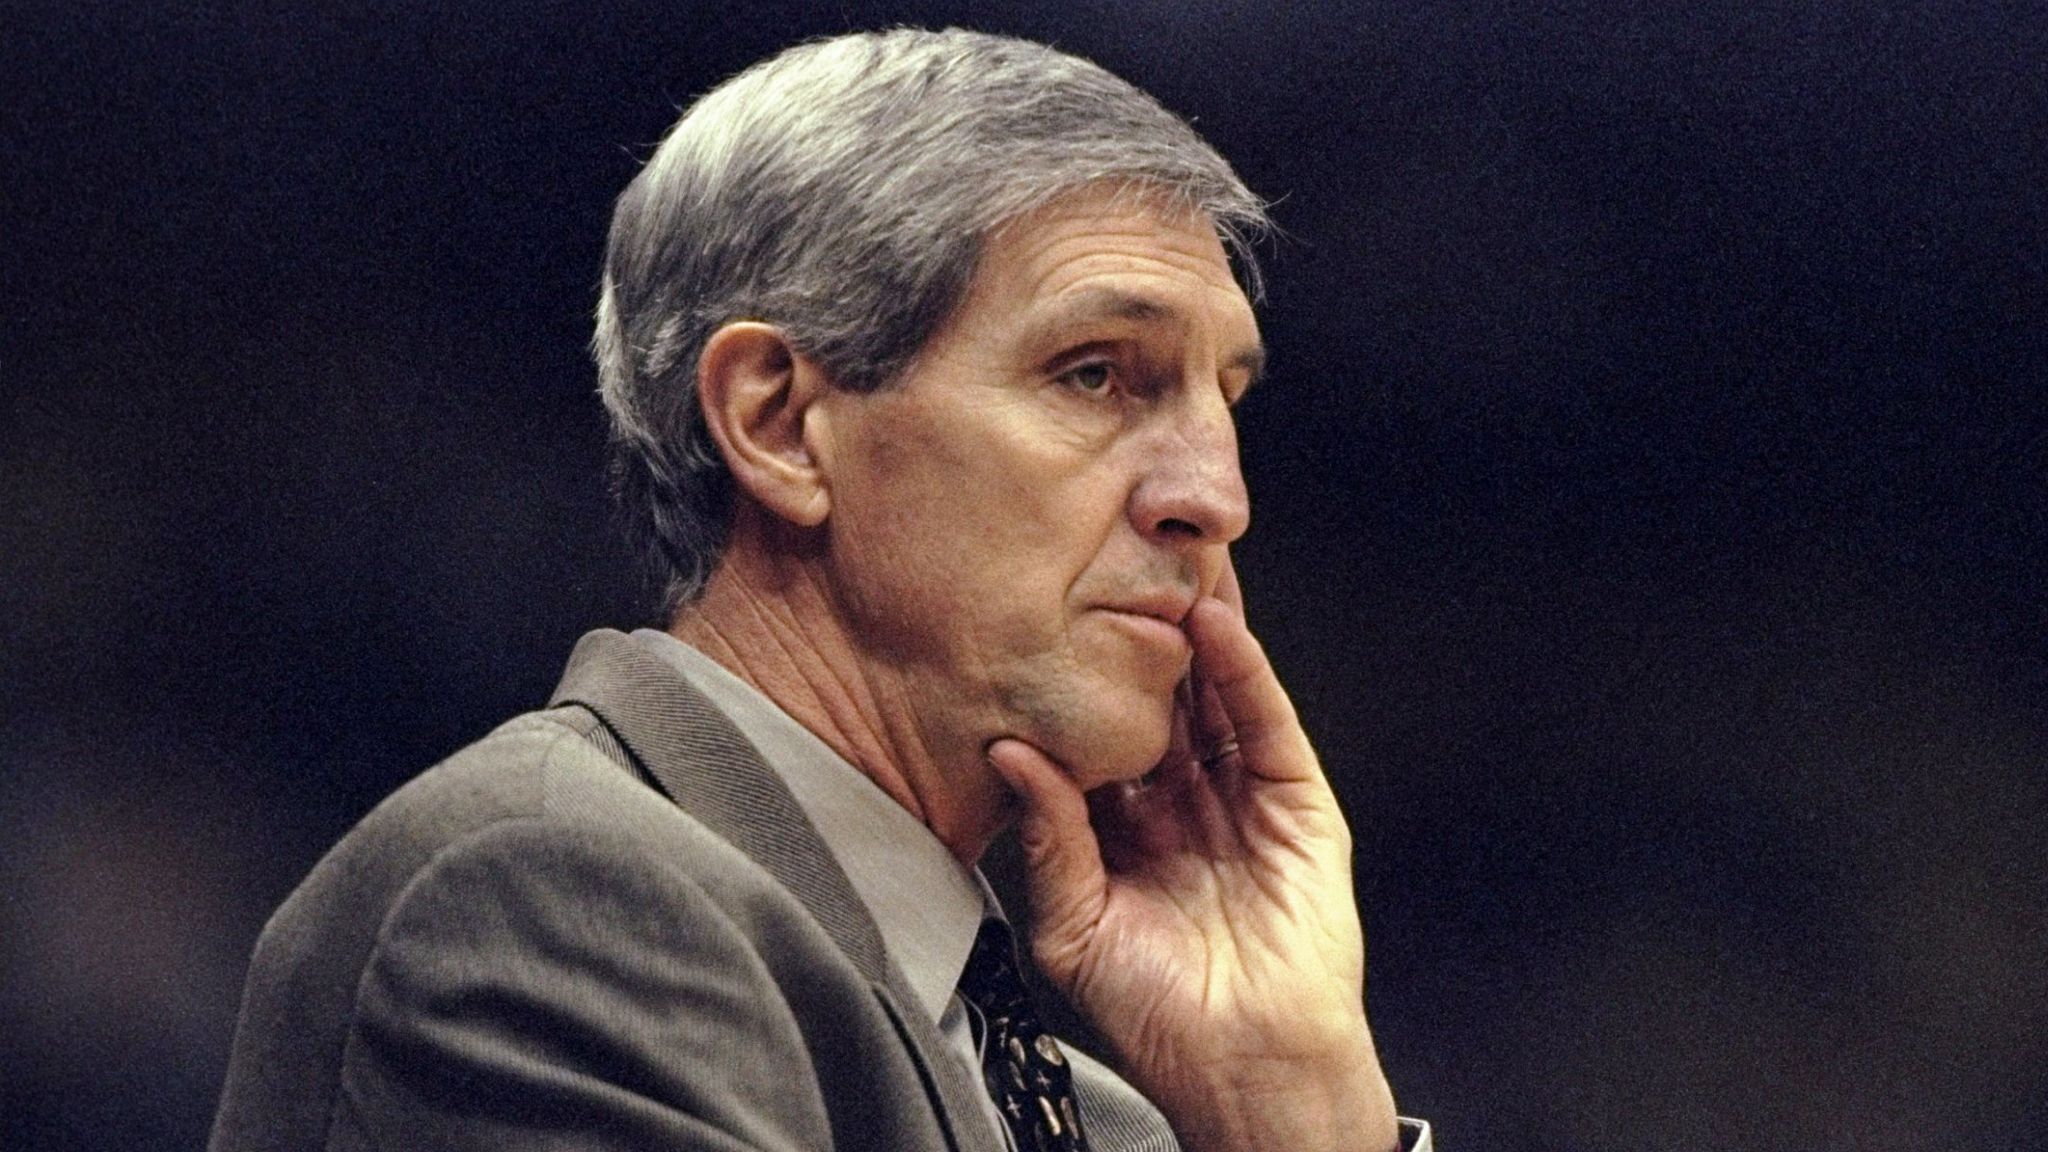 Jerry Sloan, Hall of Fame coach for Utah Jazz, dies at 78